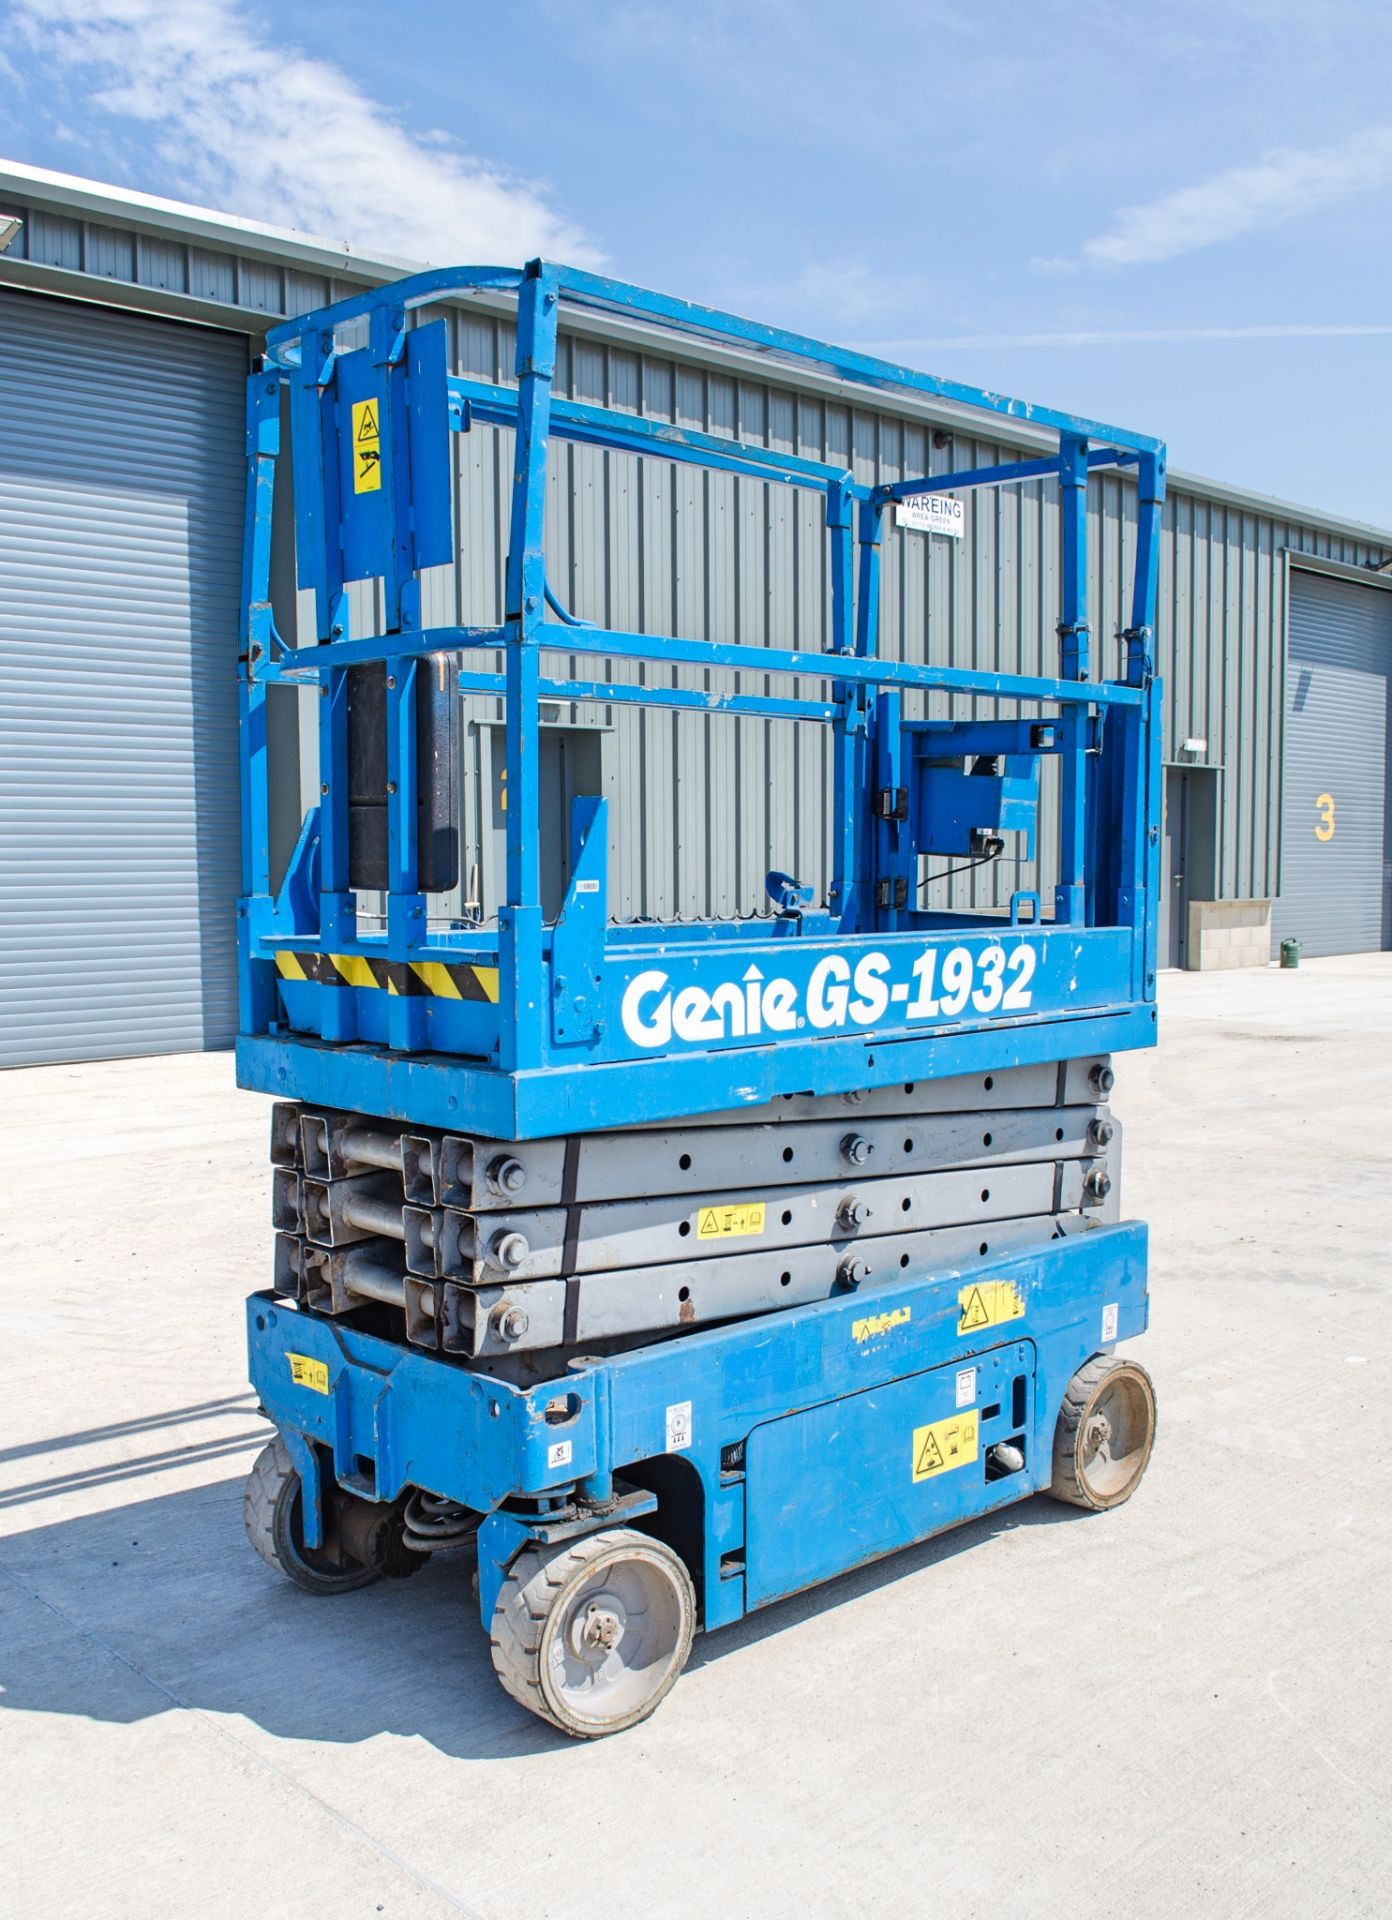 Genie GS1932 battery electric scissor lift access platform Year: 2007 S/N: B84885 Recorded Hours: